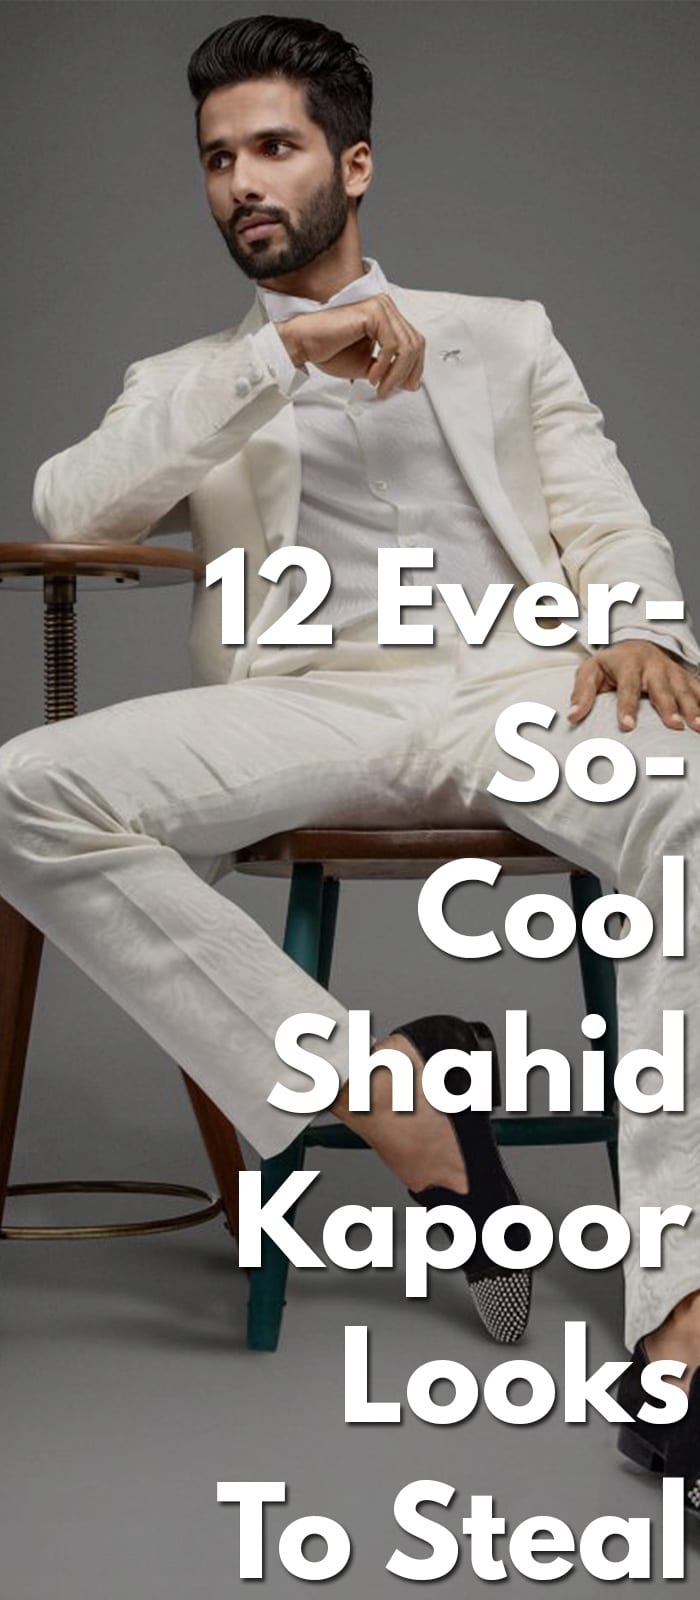 12 Ever-So-Cool Shahid Kapoor Looks To Steal.